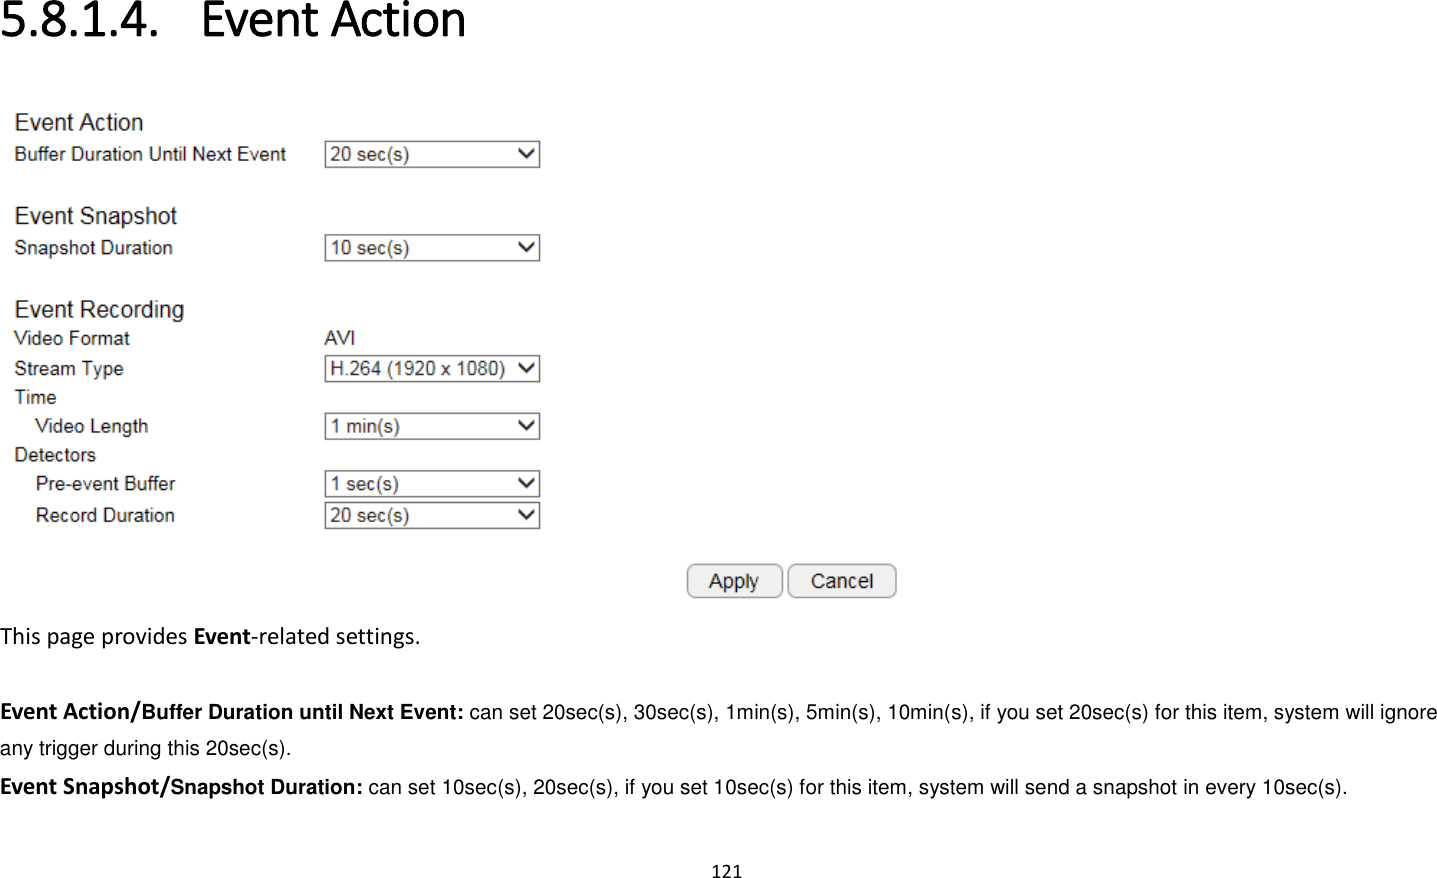 121  5.8.1.4. Event Action  This page provides Event-related settings.  Event Action/Buffer Duration until Next Event: can set 20sec(s), 30sec(s), 1min(s), 5min(s), 10min(s), if you set 20sec(s) for this item, system will ignore any trigger during this 20sec(s). Event Snapshot/Snapshot Duration: can set 10sec(s), 20sec(s), if you set 10sec(s) for this item, system will send a snapshot in every 10sec(s). 